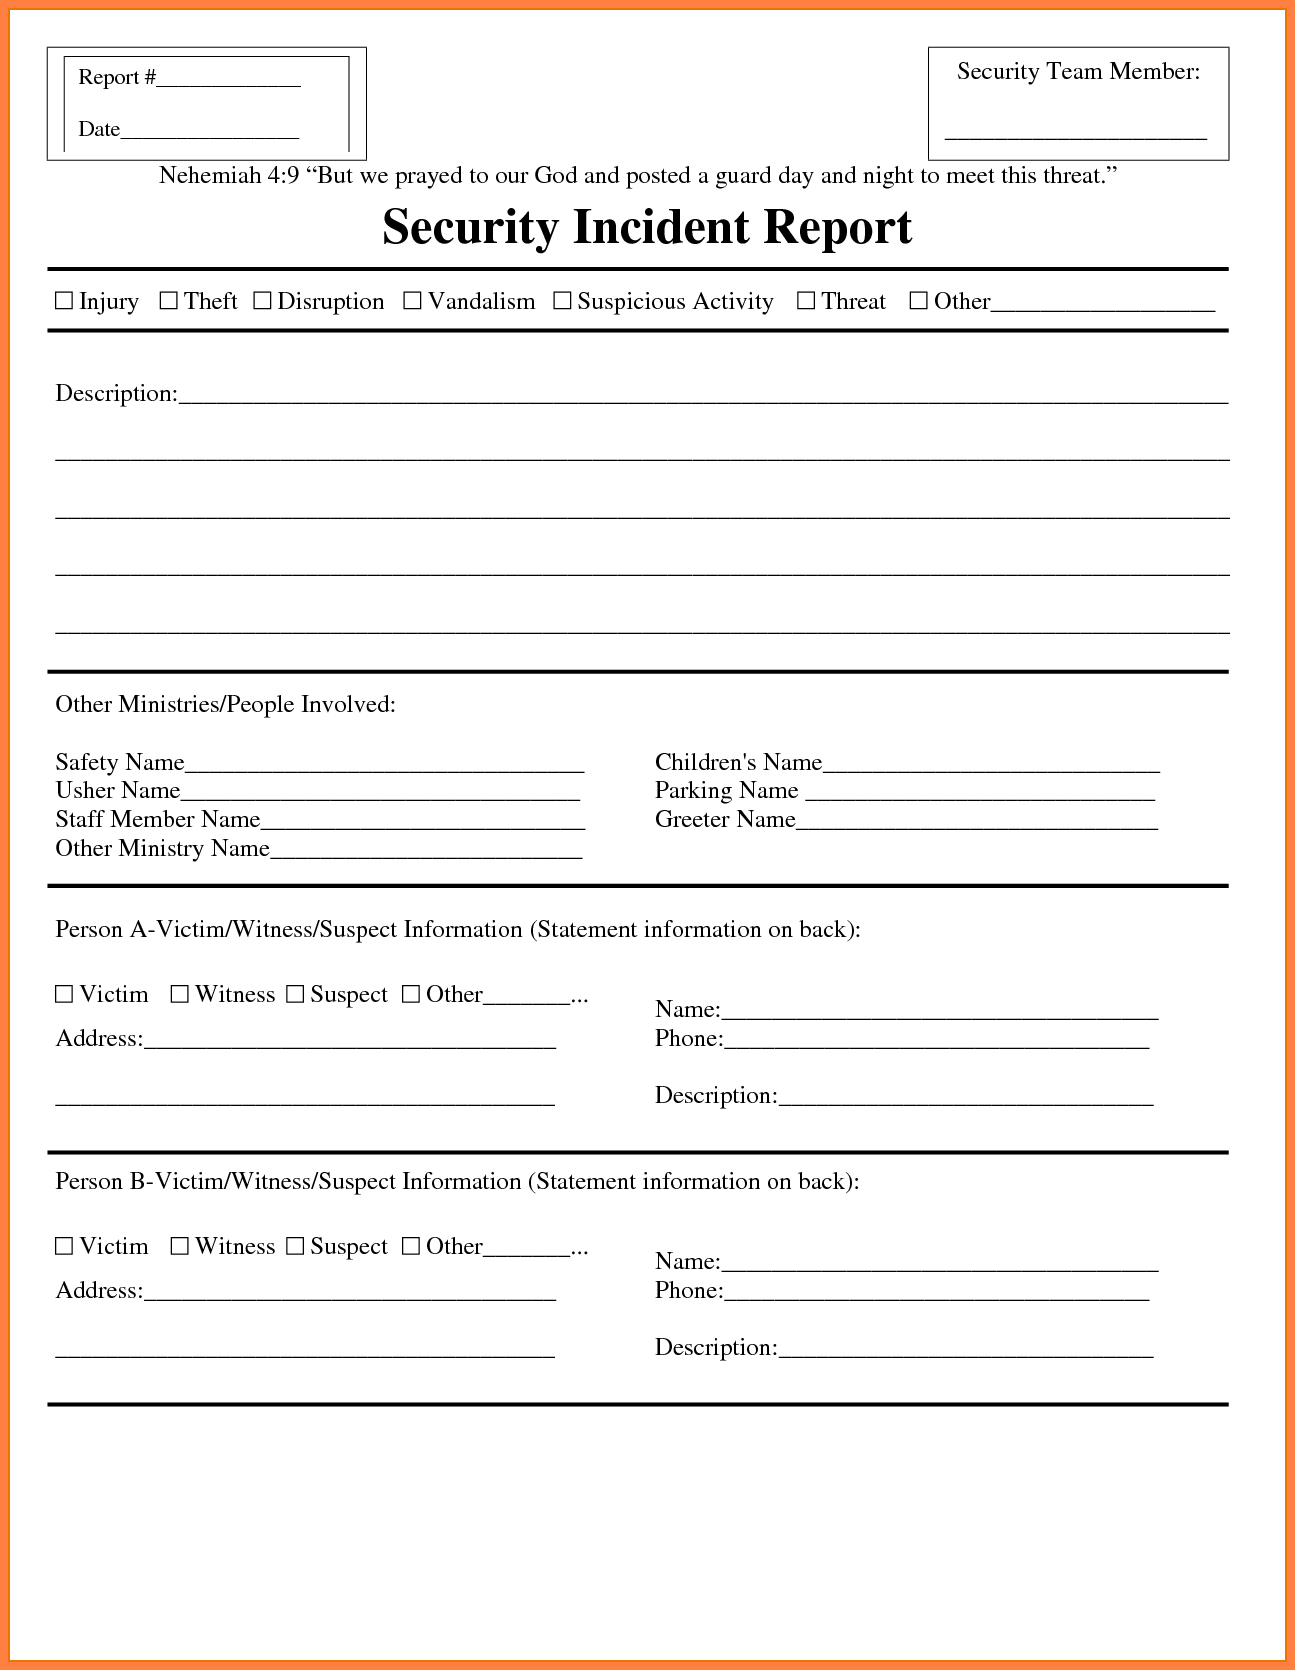 Soc 1 Type 2 Report Example | Tagua With Ssae 16 Report Template